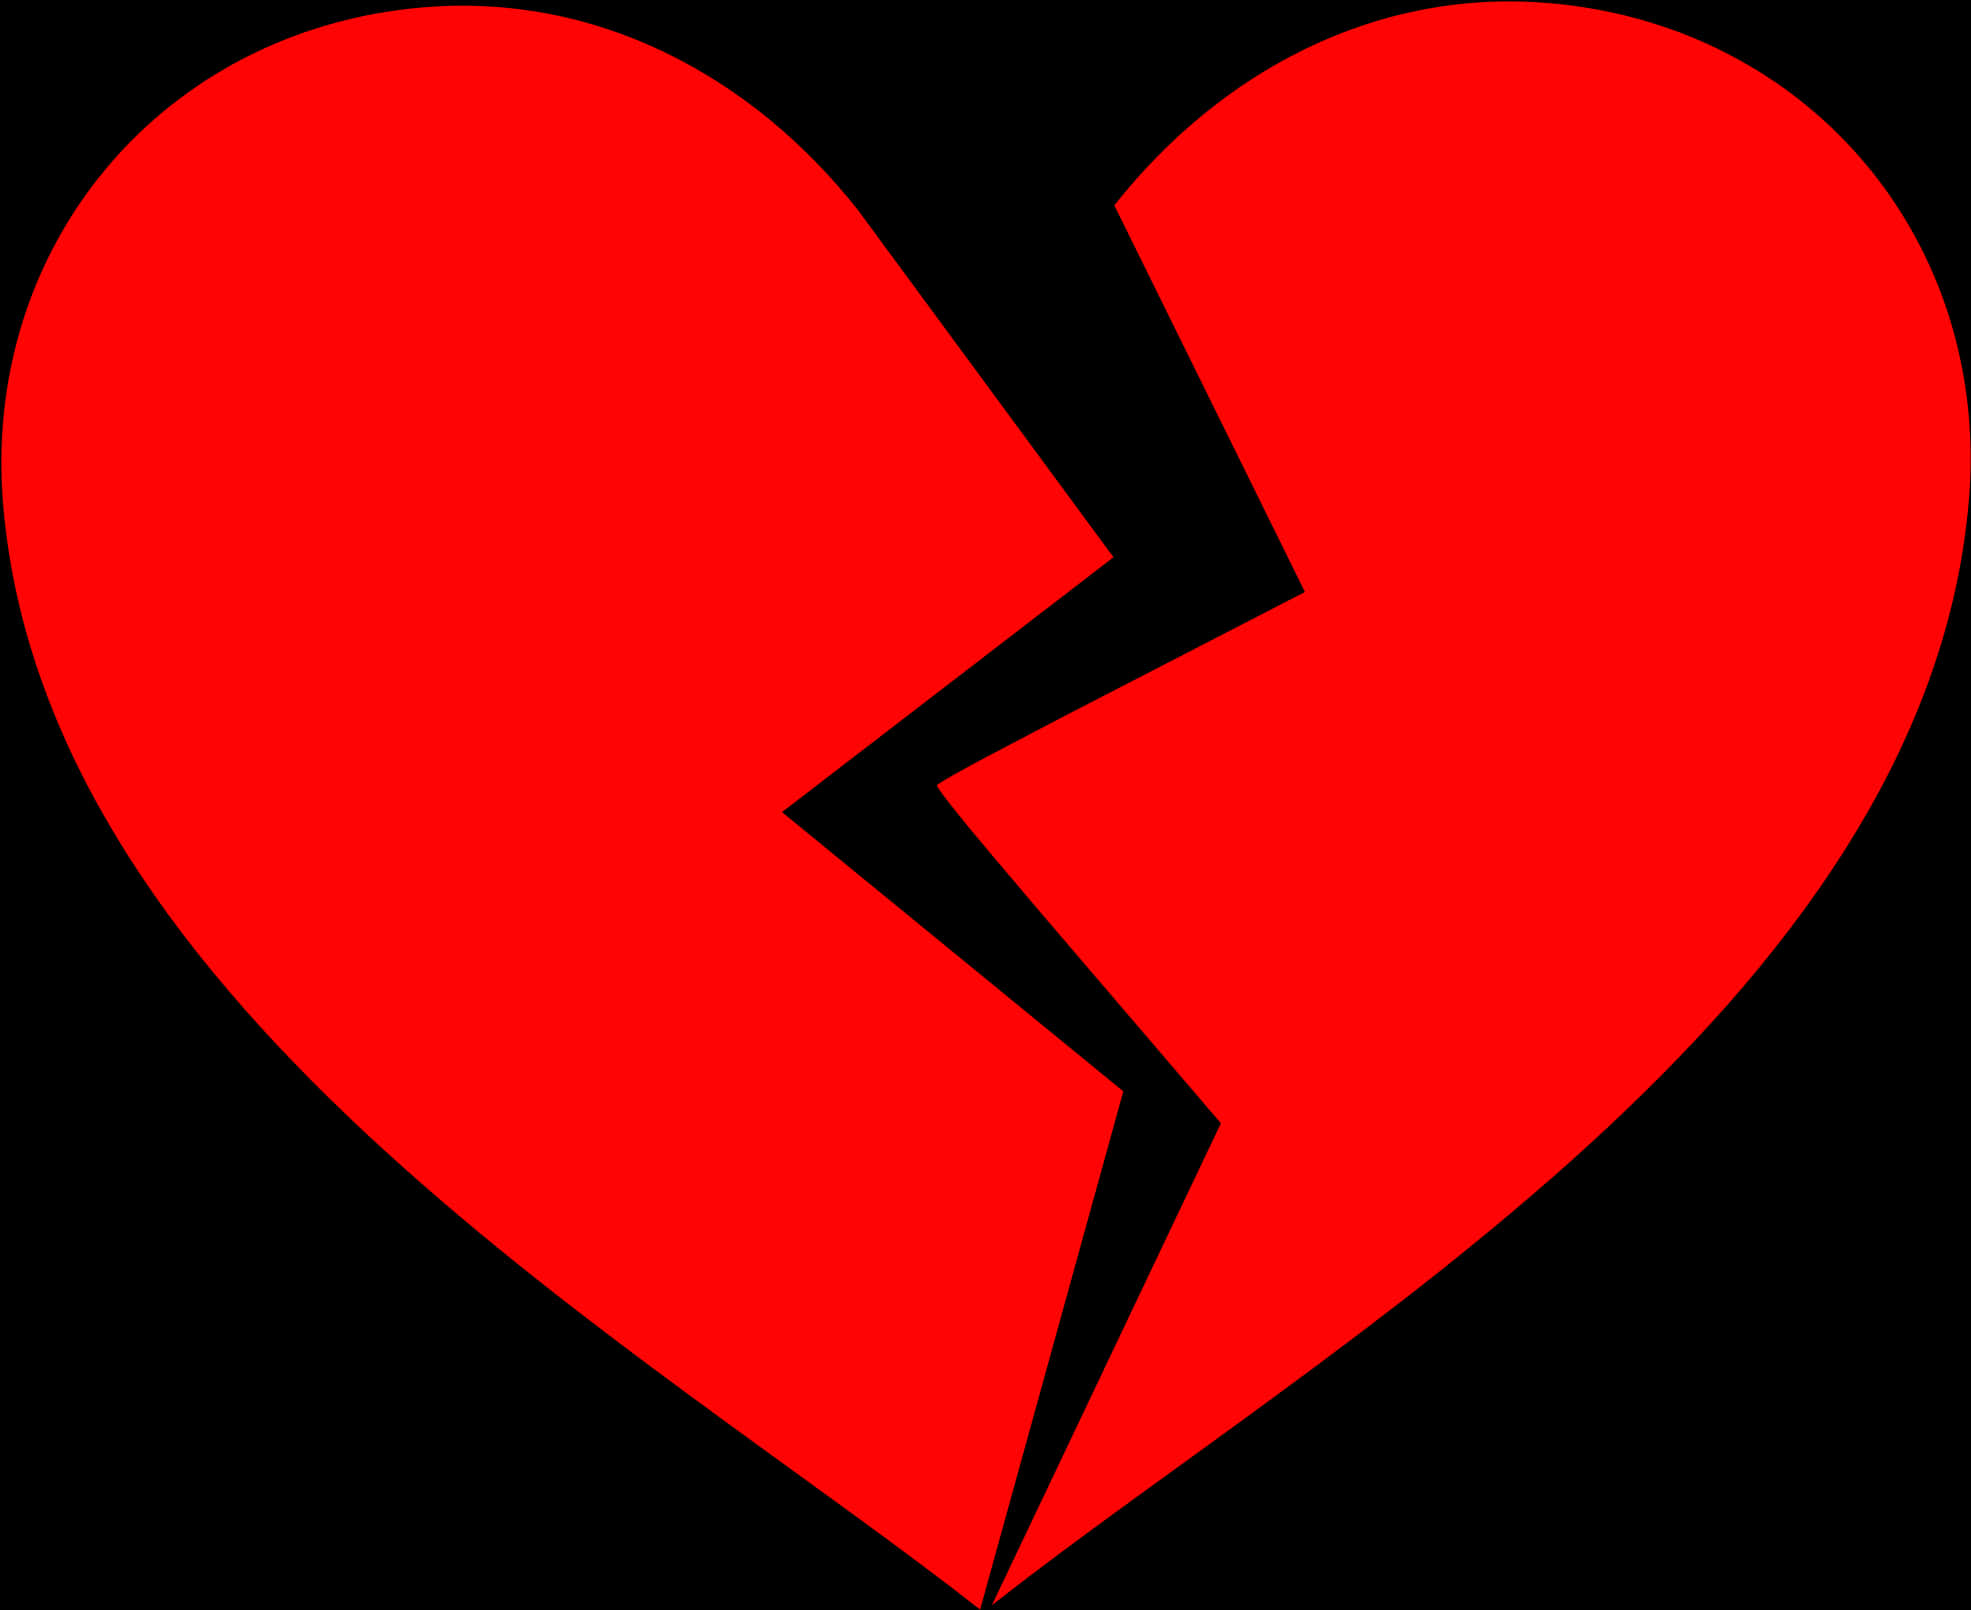 A Red Broken Heart On A Black Background